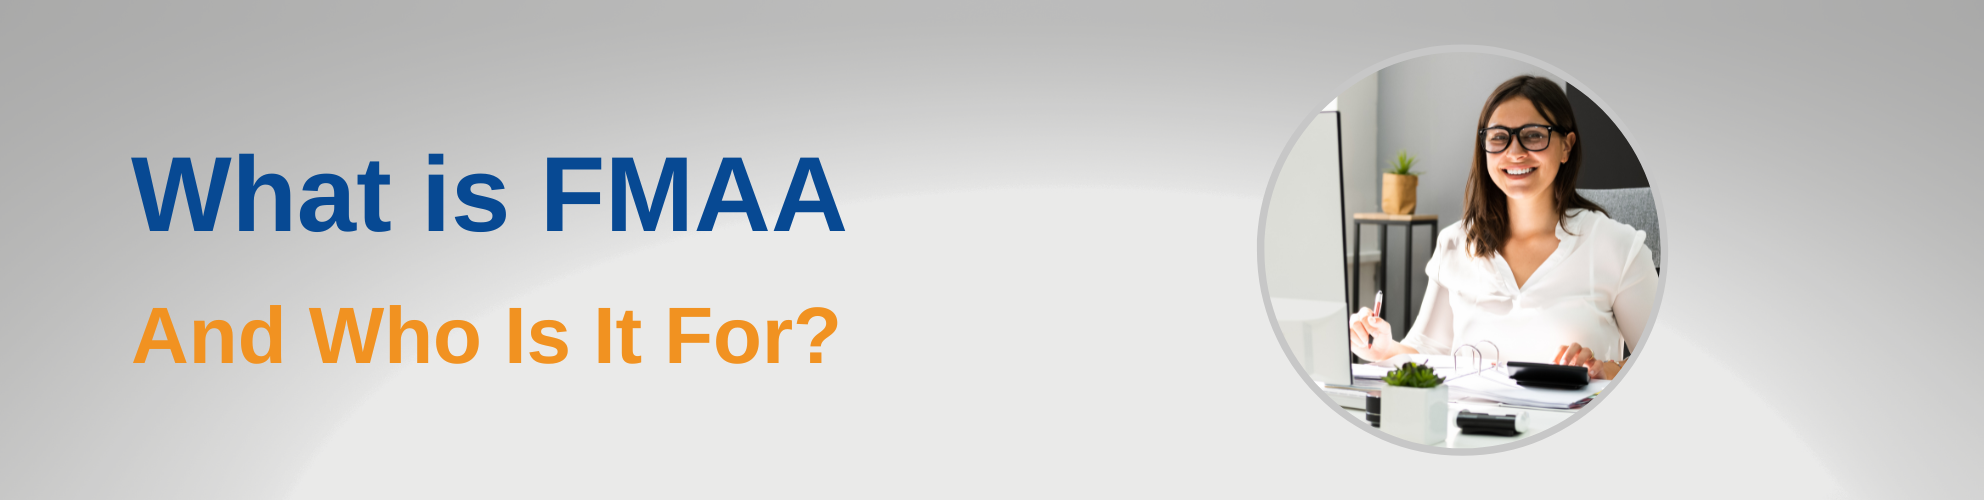 What is FMAA and Who is it for